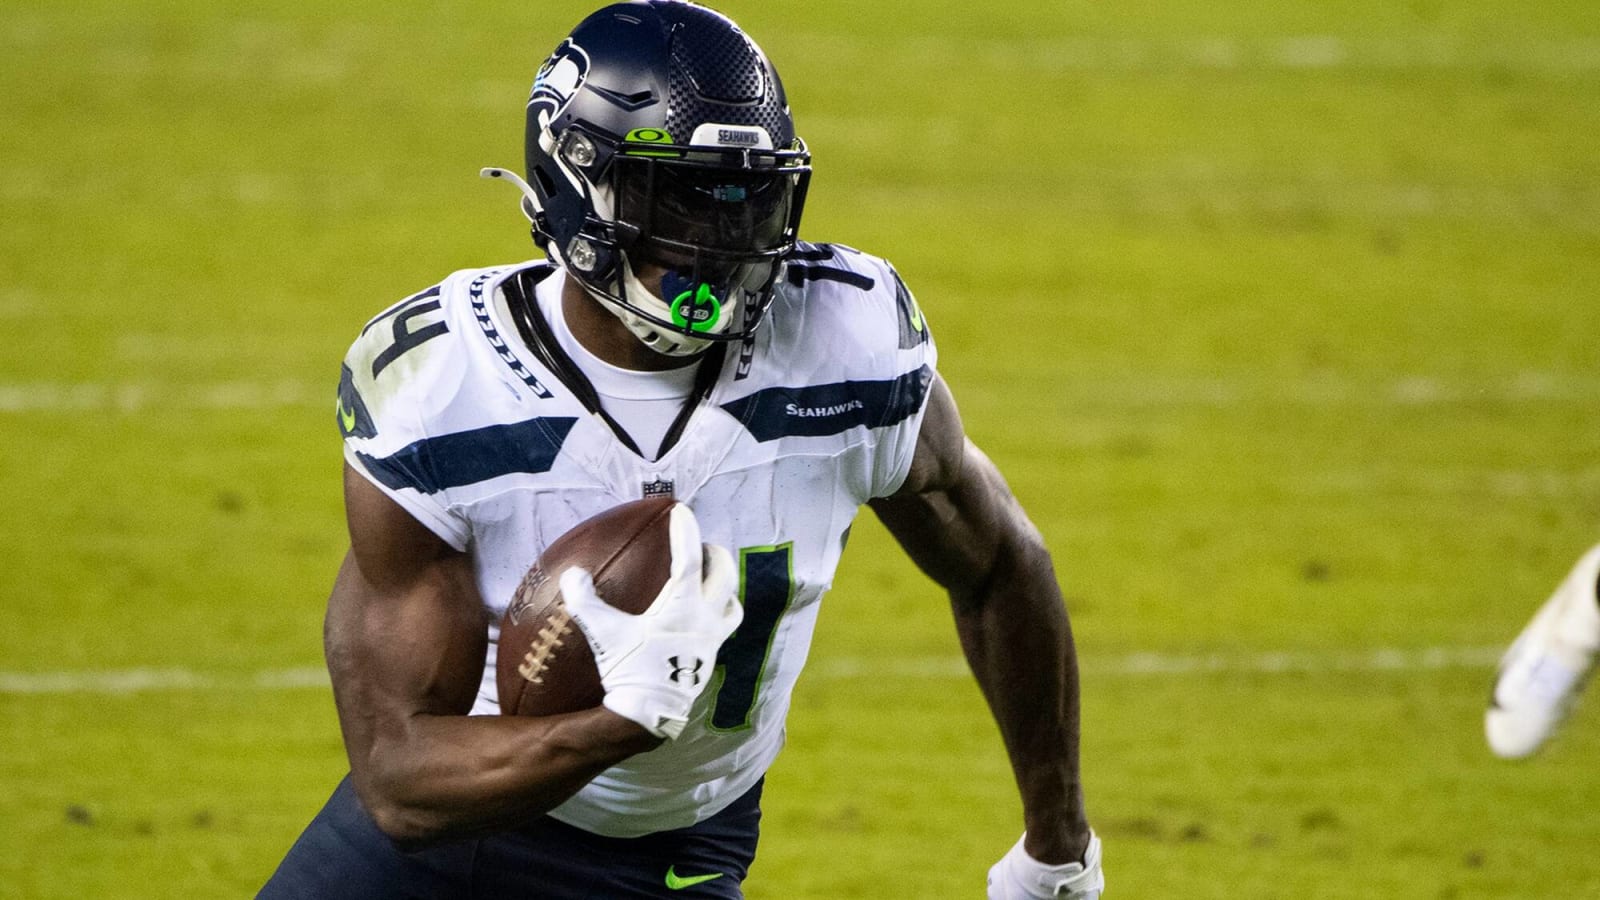 DK Metcalf gushes about Jaxon Smith-Njigba, Seattle’s offense: ‘We’ve got a whole arsenal’